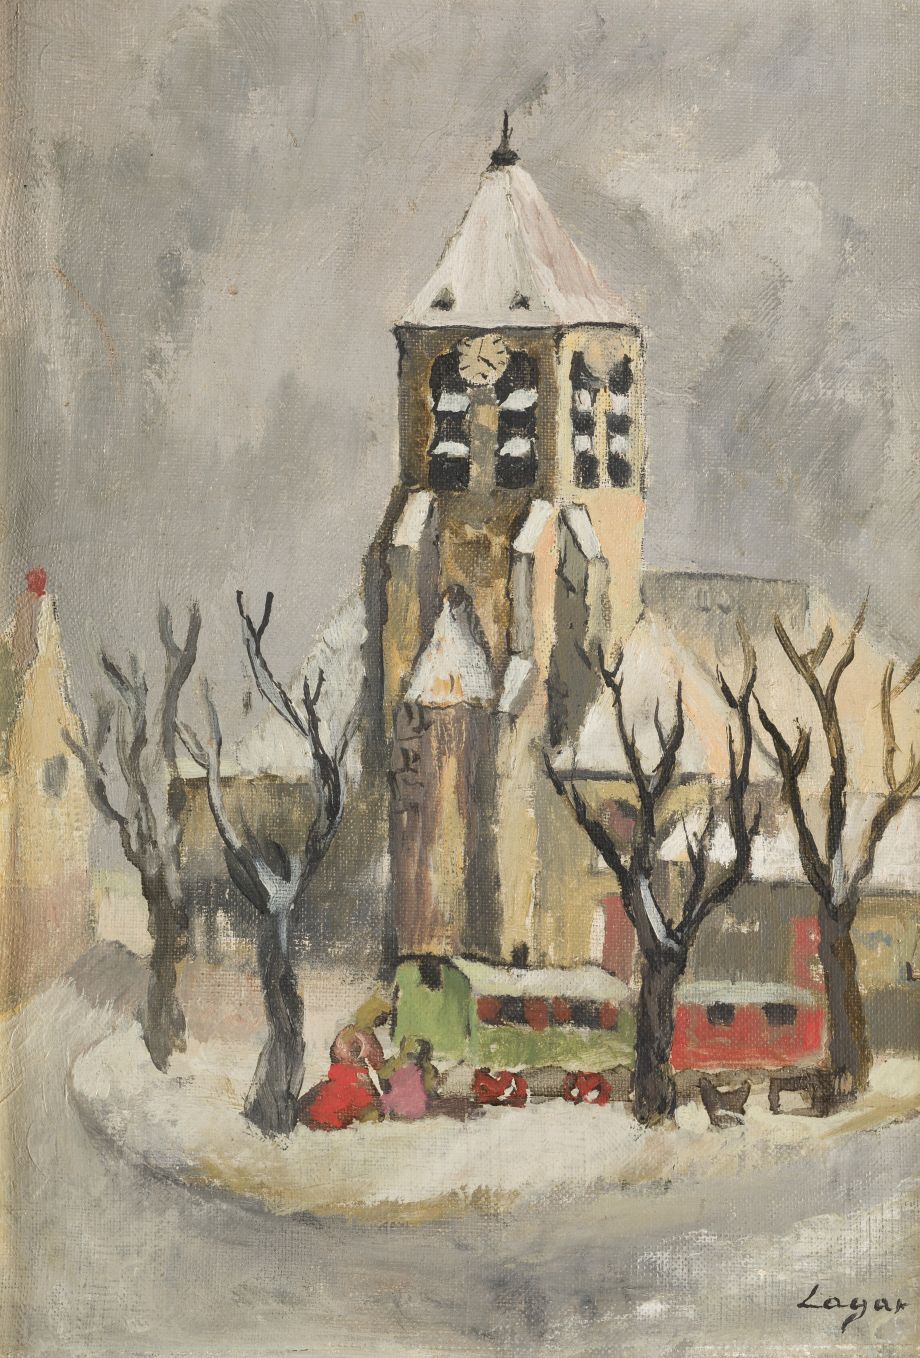 CELSO LAGAR (1891 / 1966) "Rouloutes in front of the church" 右下角有签名 布面油画板。32,5 x&hellip;